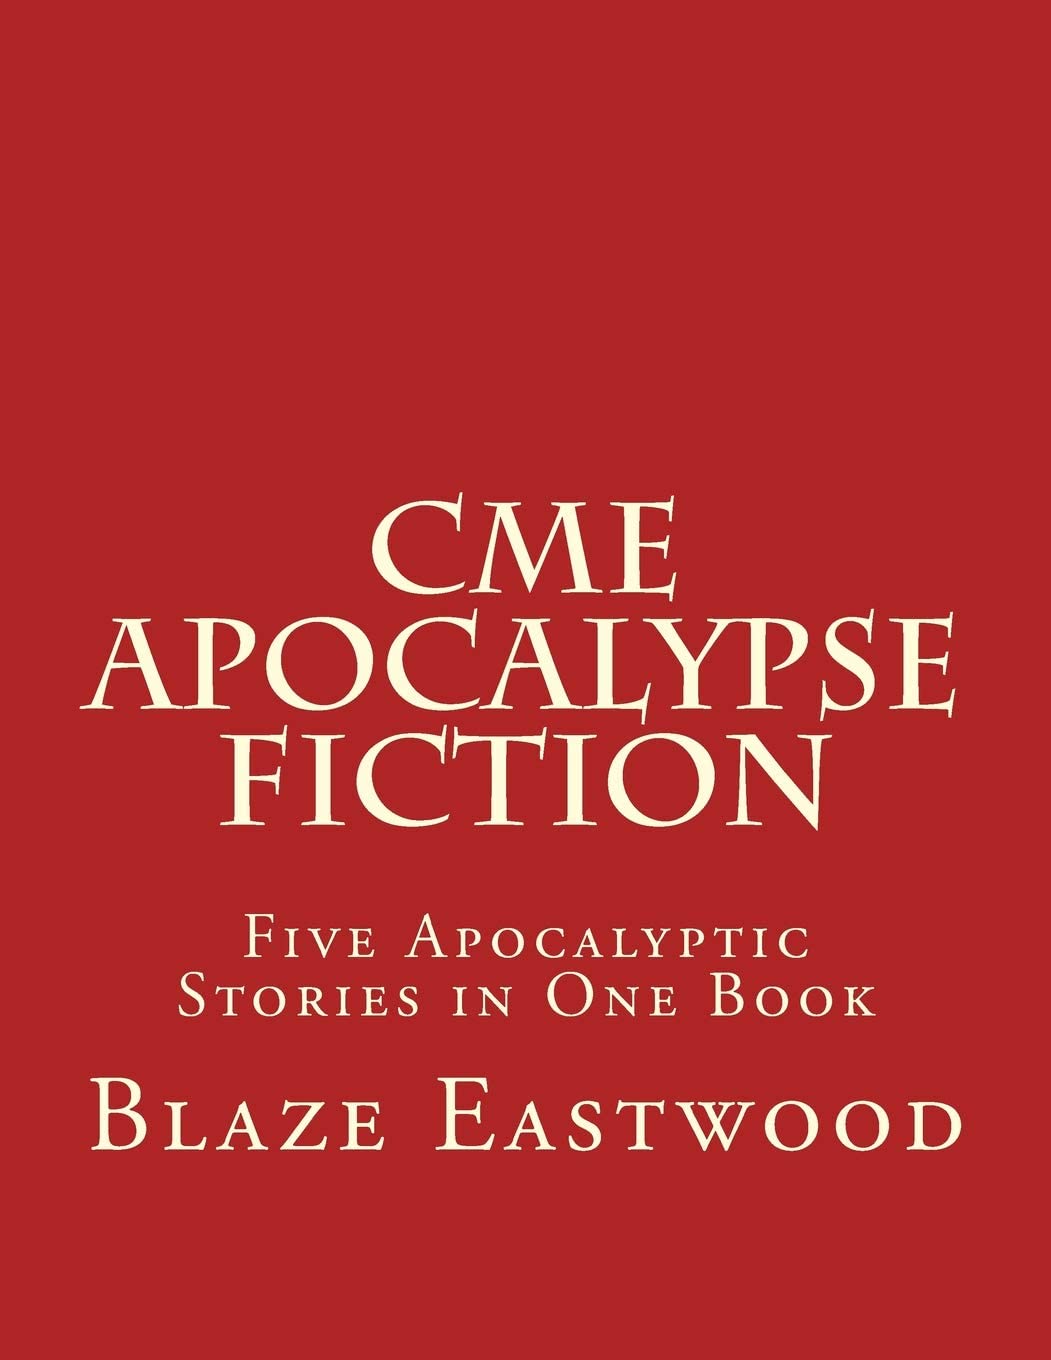 CME Apocalypse Fiction: Five Apocalyptic Stories in One Book